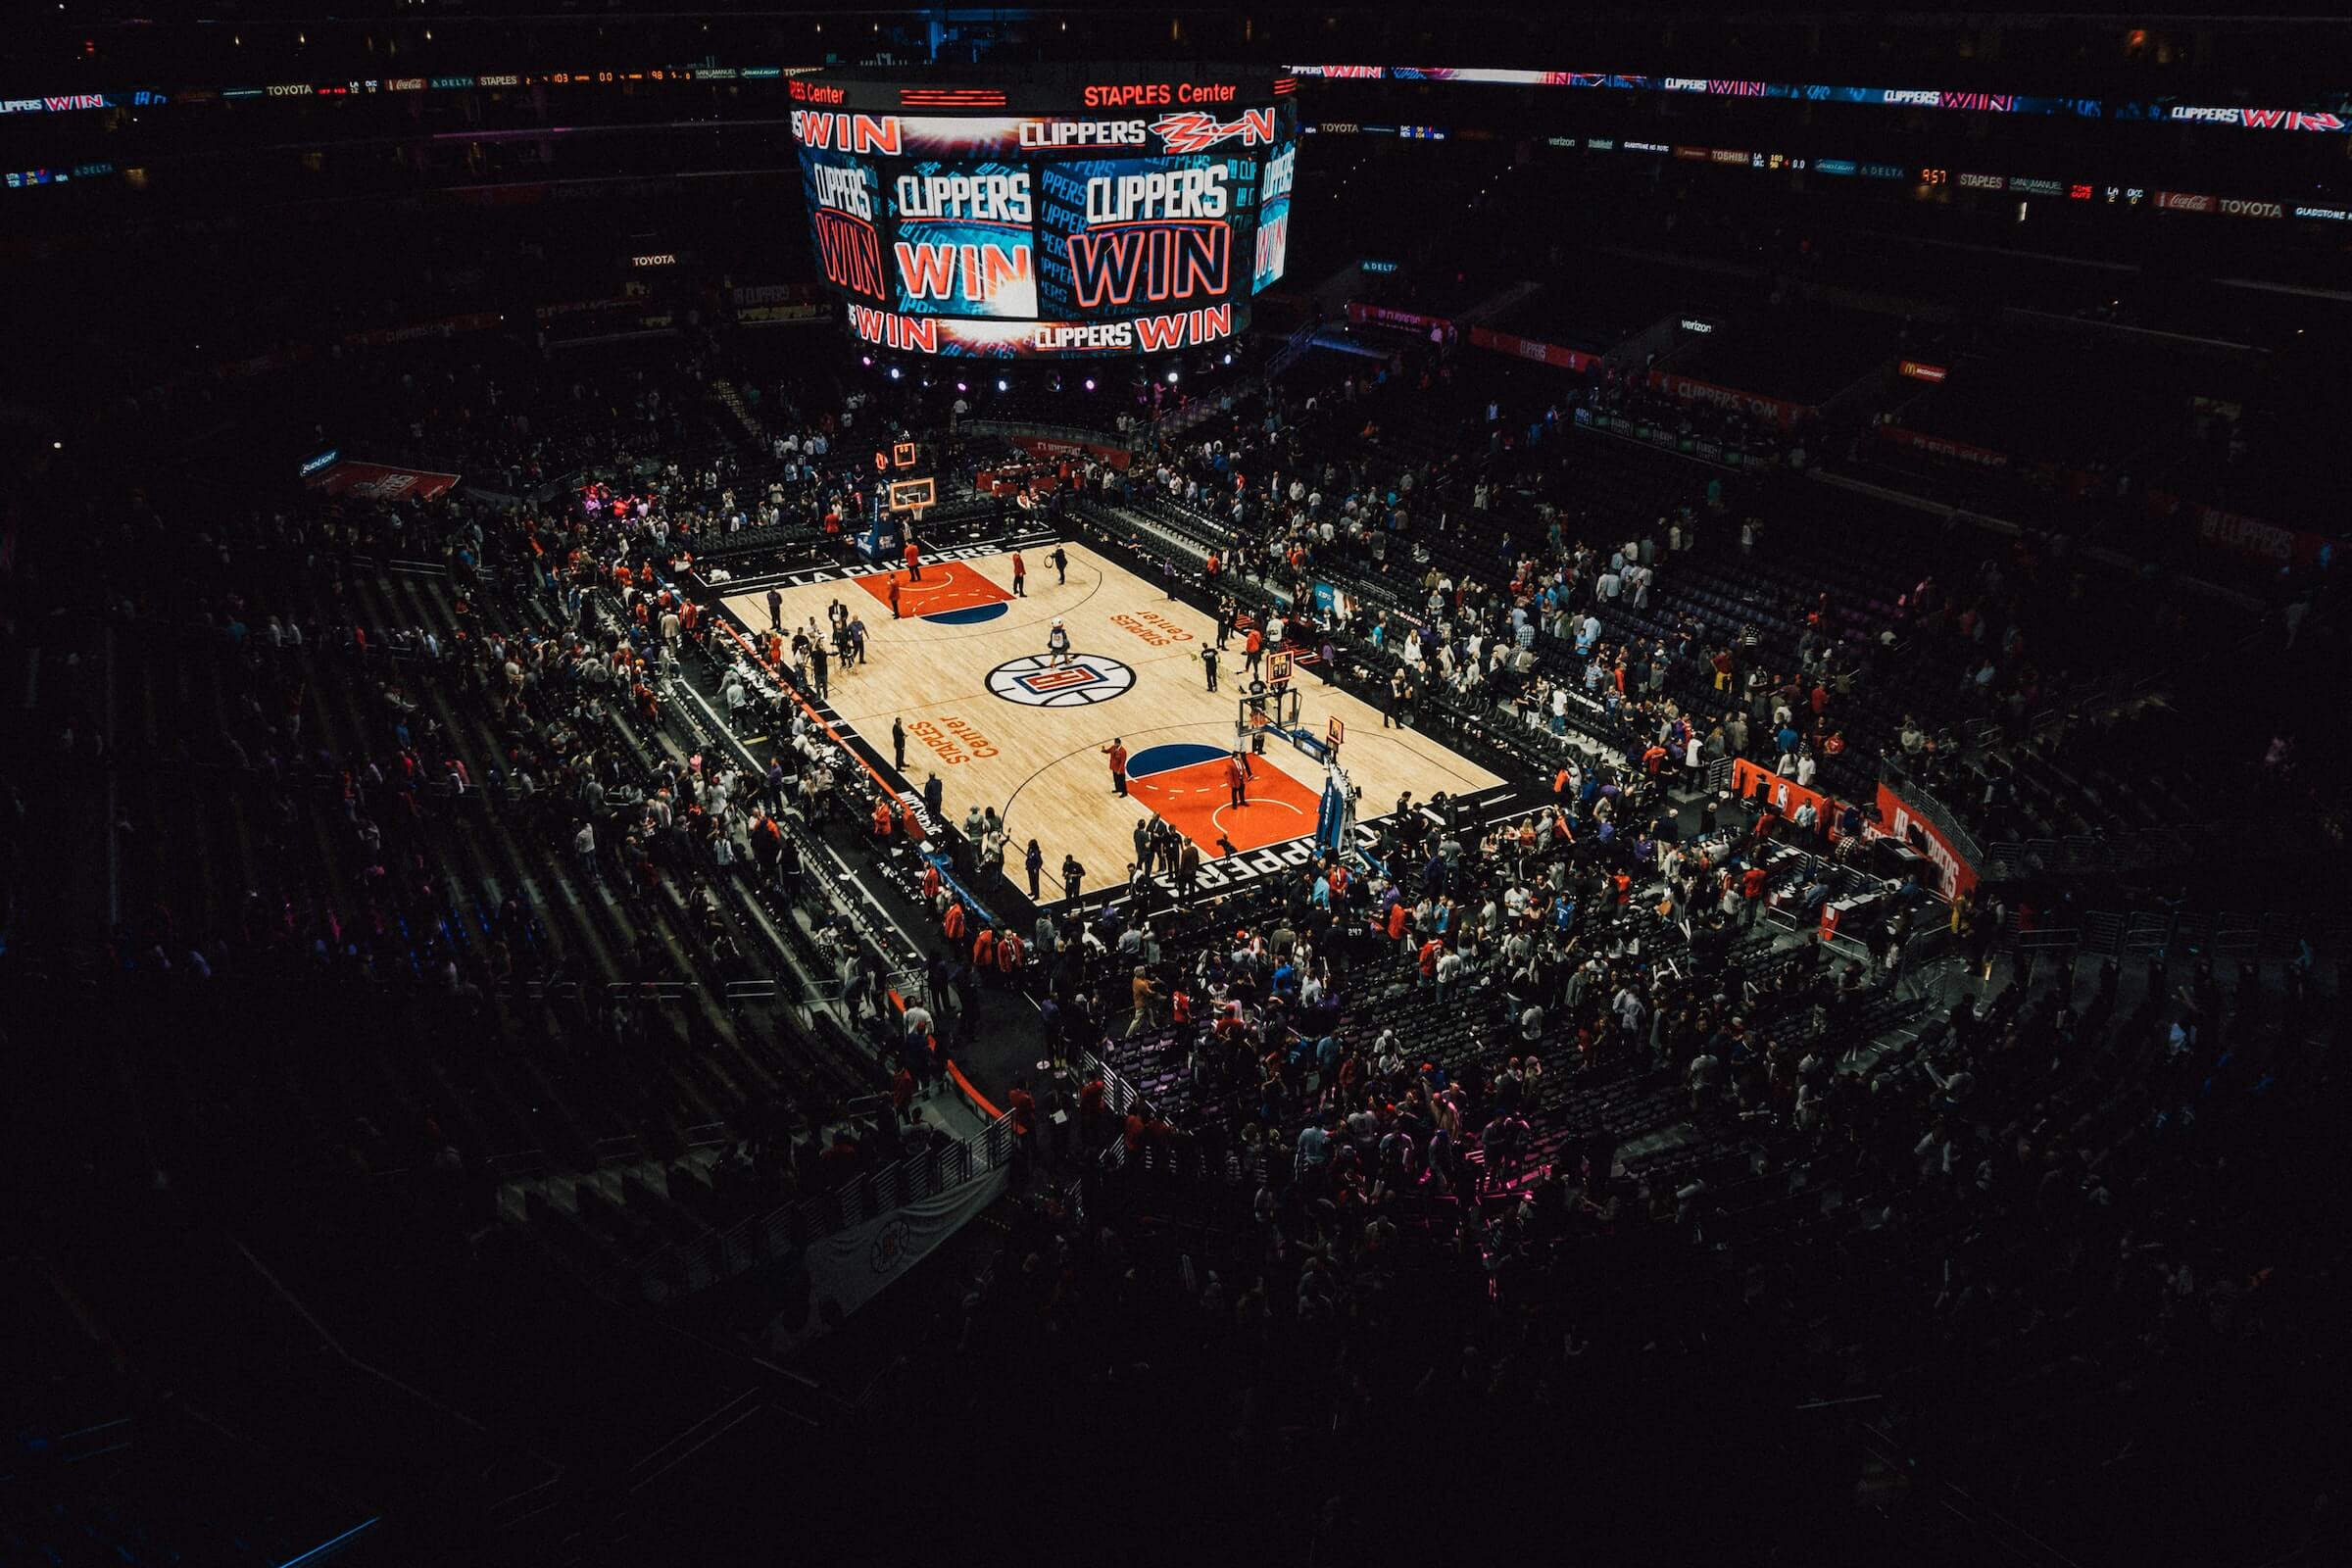 Staples Center Clippers Game Seating Chart | Cabinets Matttroy